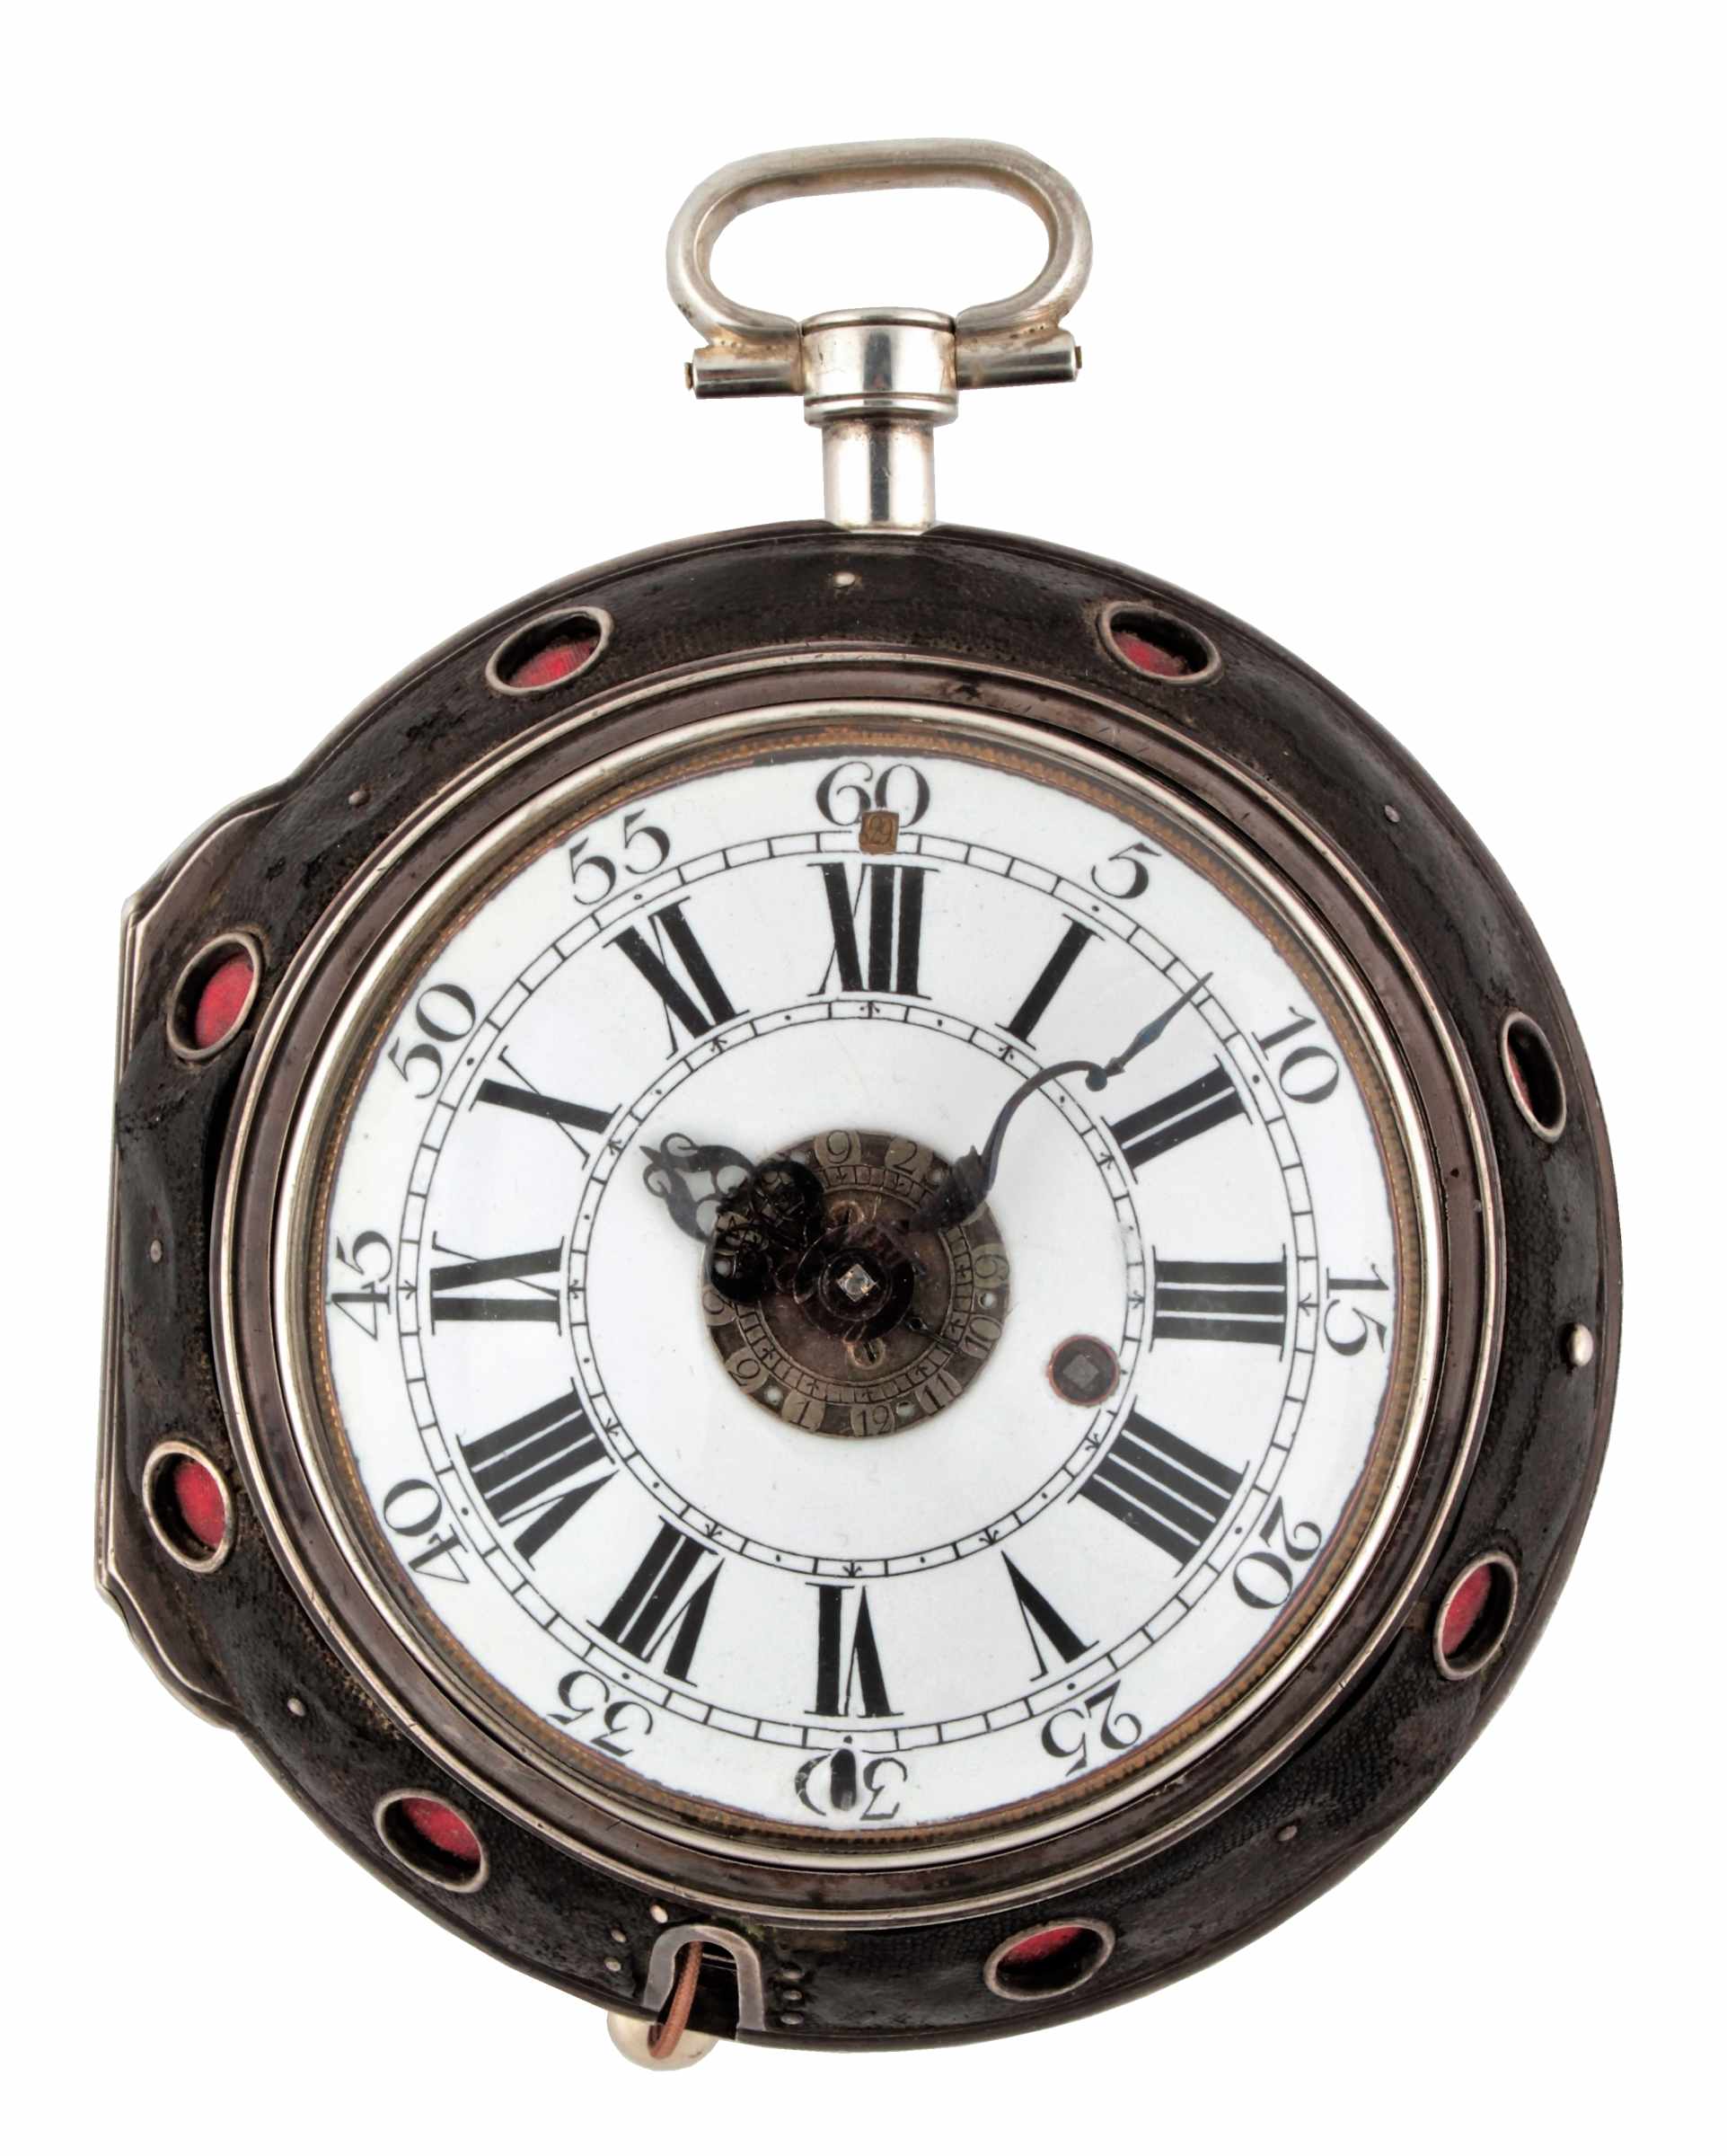 A large silver coach watch / coach clock labeled Jos. Mirroir Paris |  Watches | Antiques - Gallery USTAR